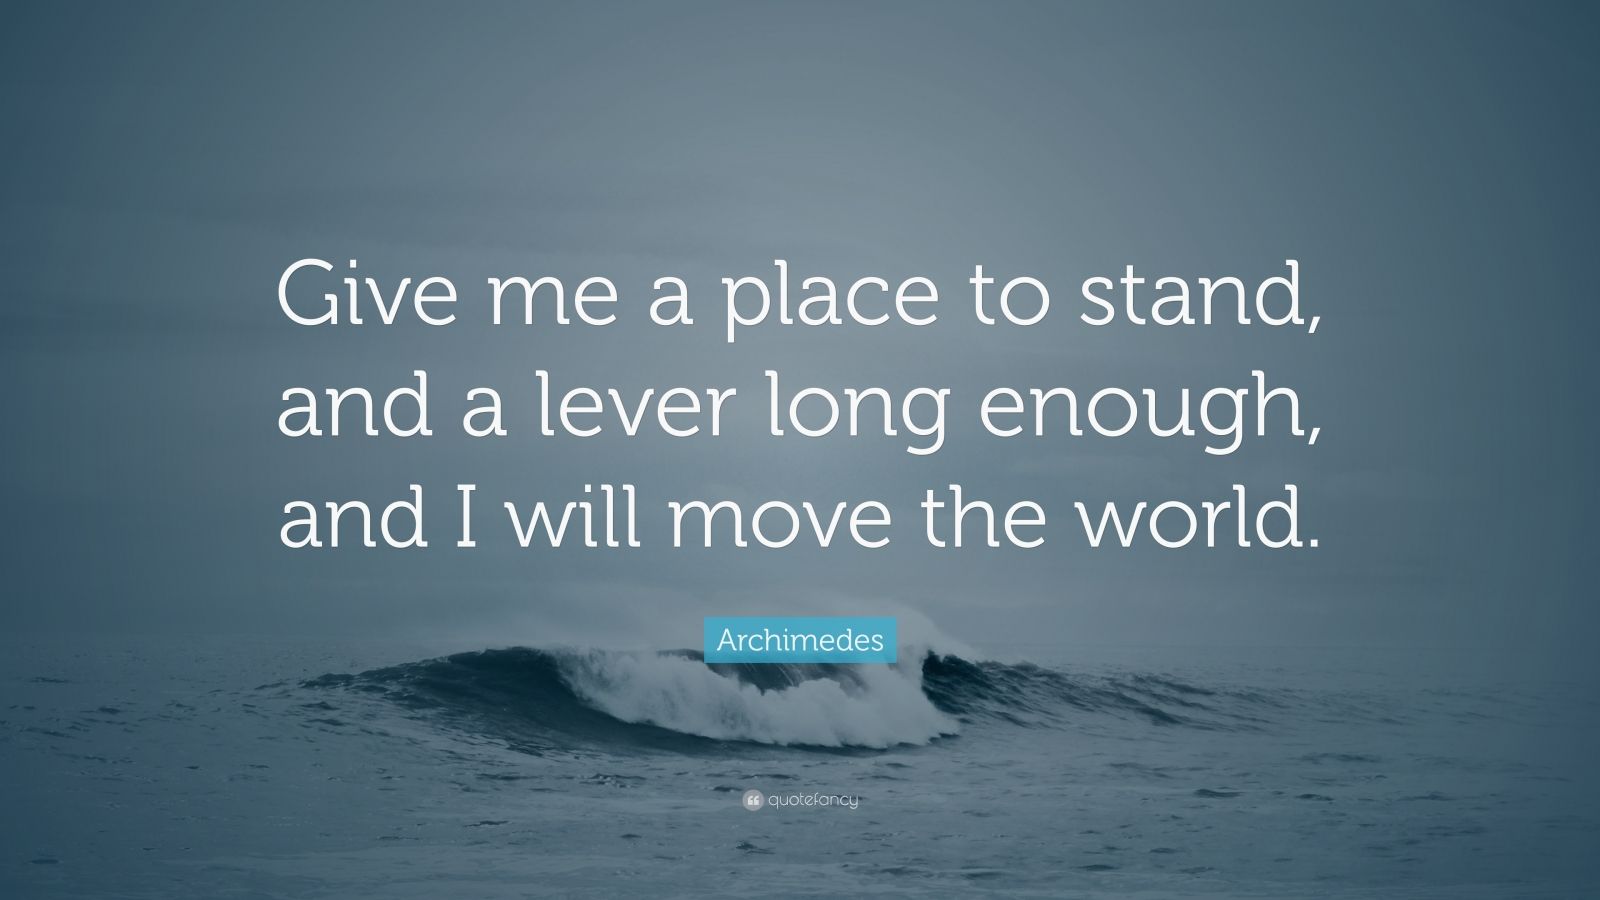 Archimedes Quote: “Give me a place to stand, and a lever long enough